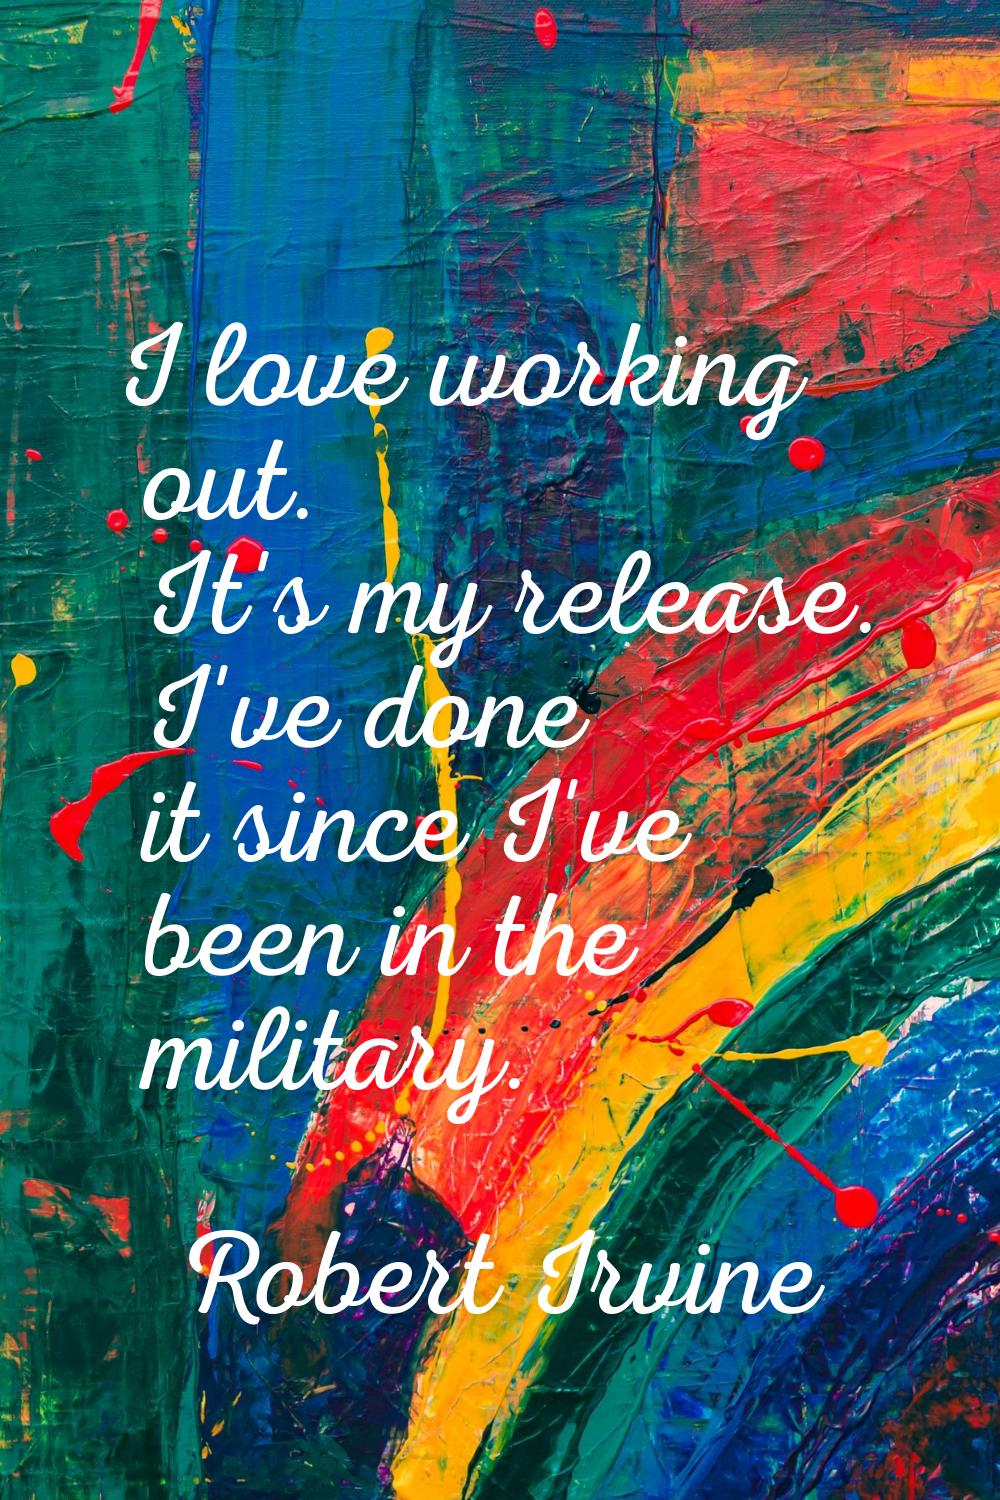 I love working out. It's my release. I've done it since I've been in the military.